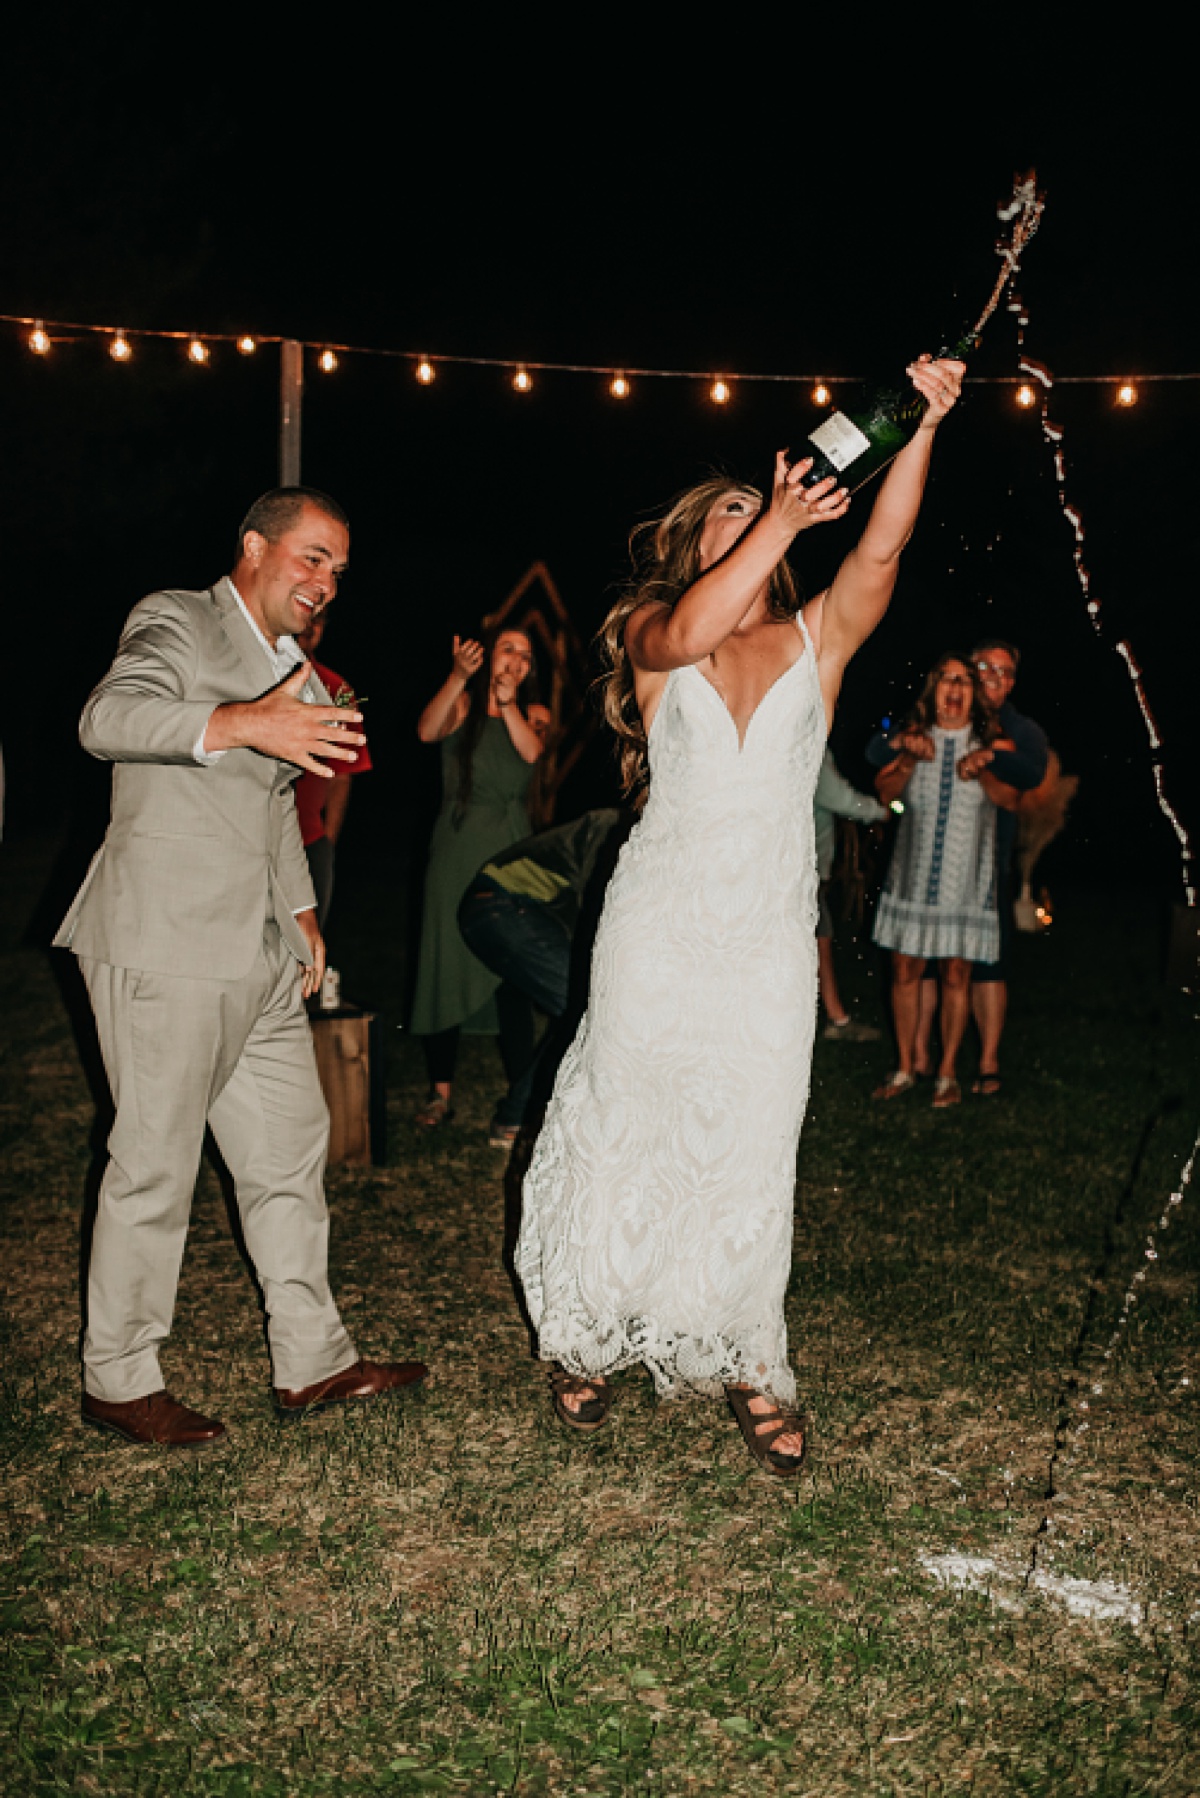 Intimate Woodsy Wedding Reception in a campground with tea lights